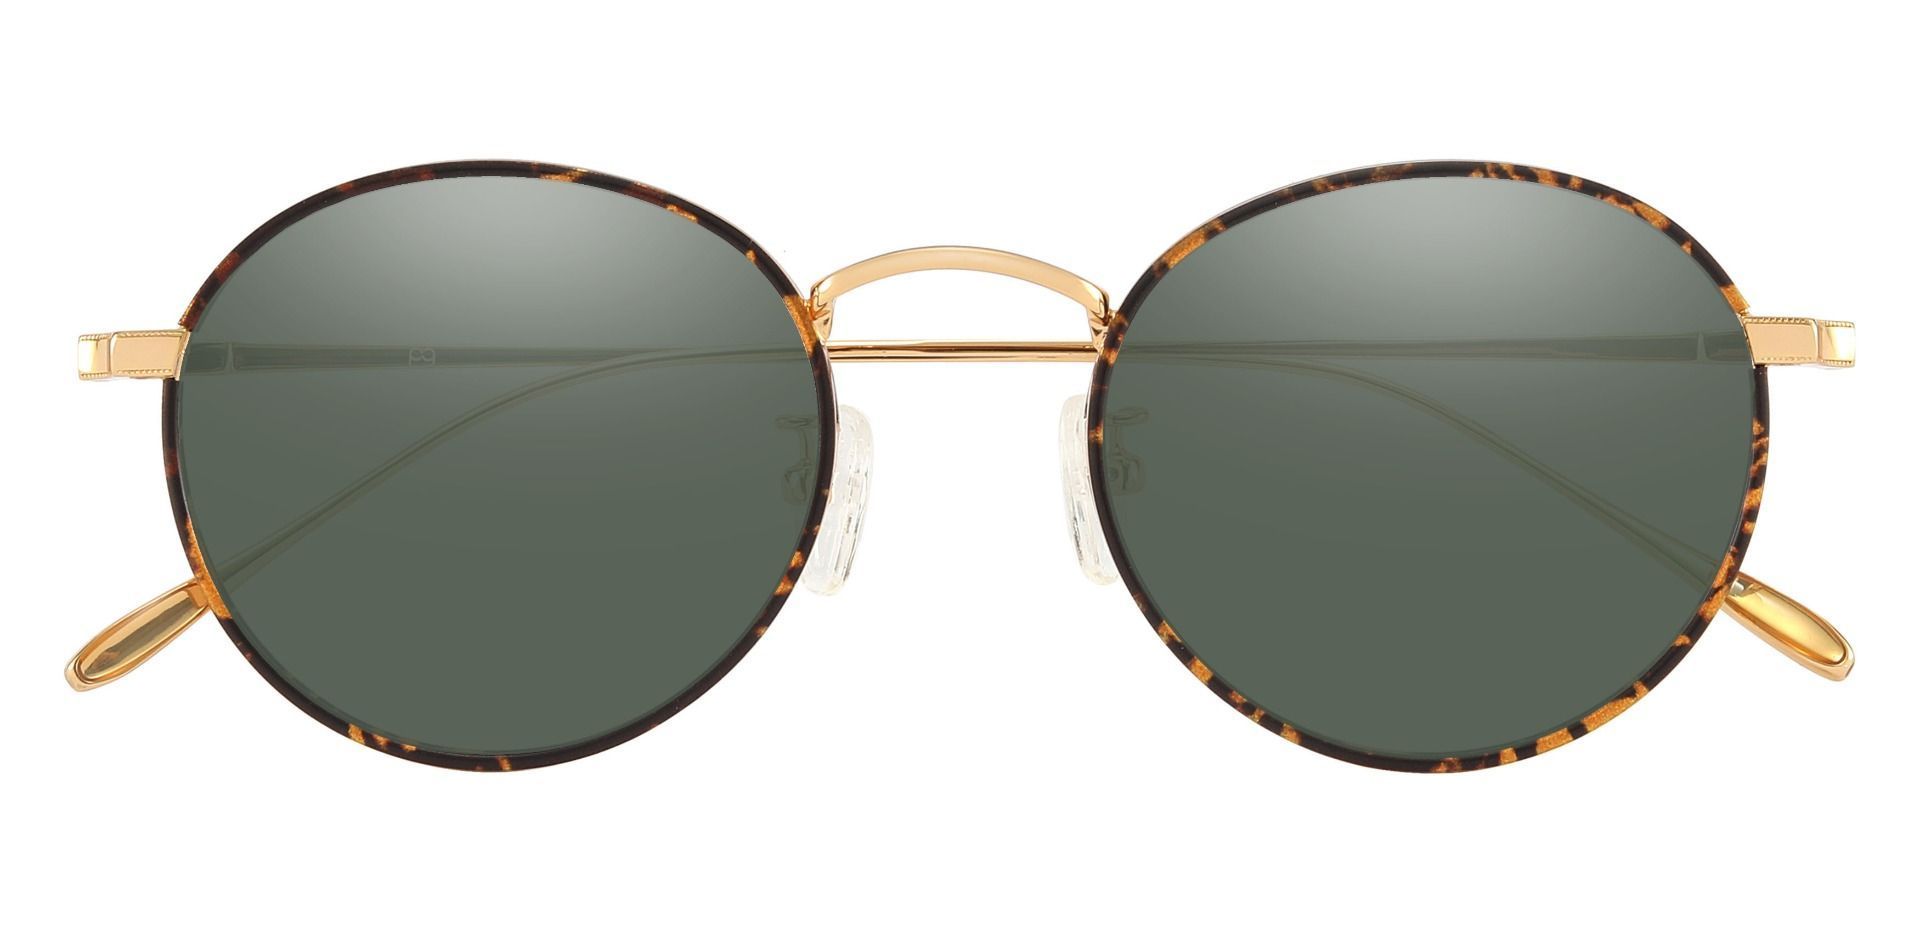 Cornwall Oval Lined Bifocal Sunglasses - Tortoise Frame With Green Lenses